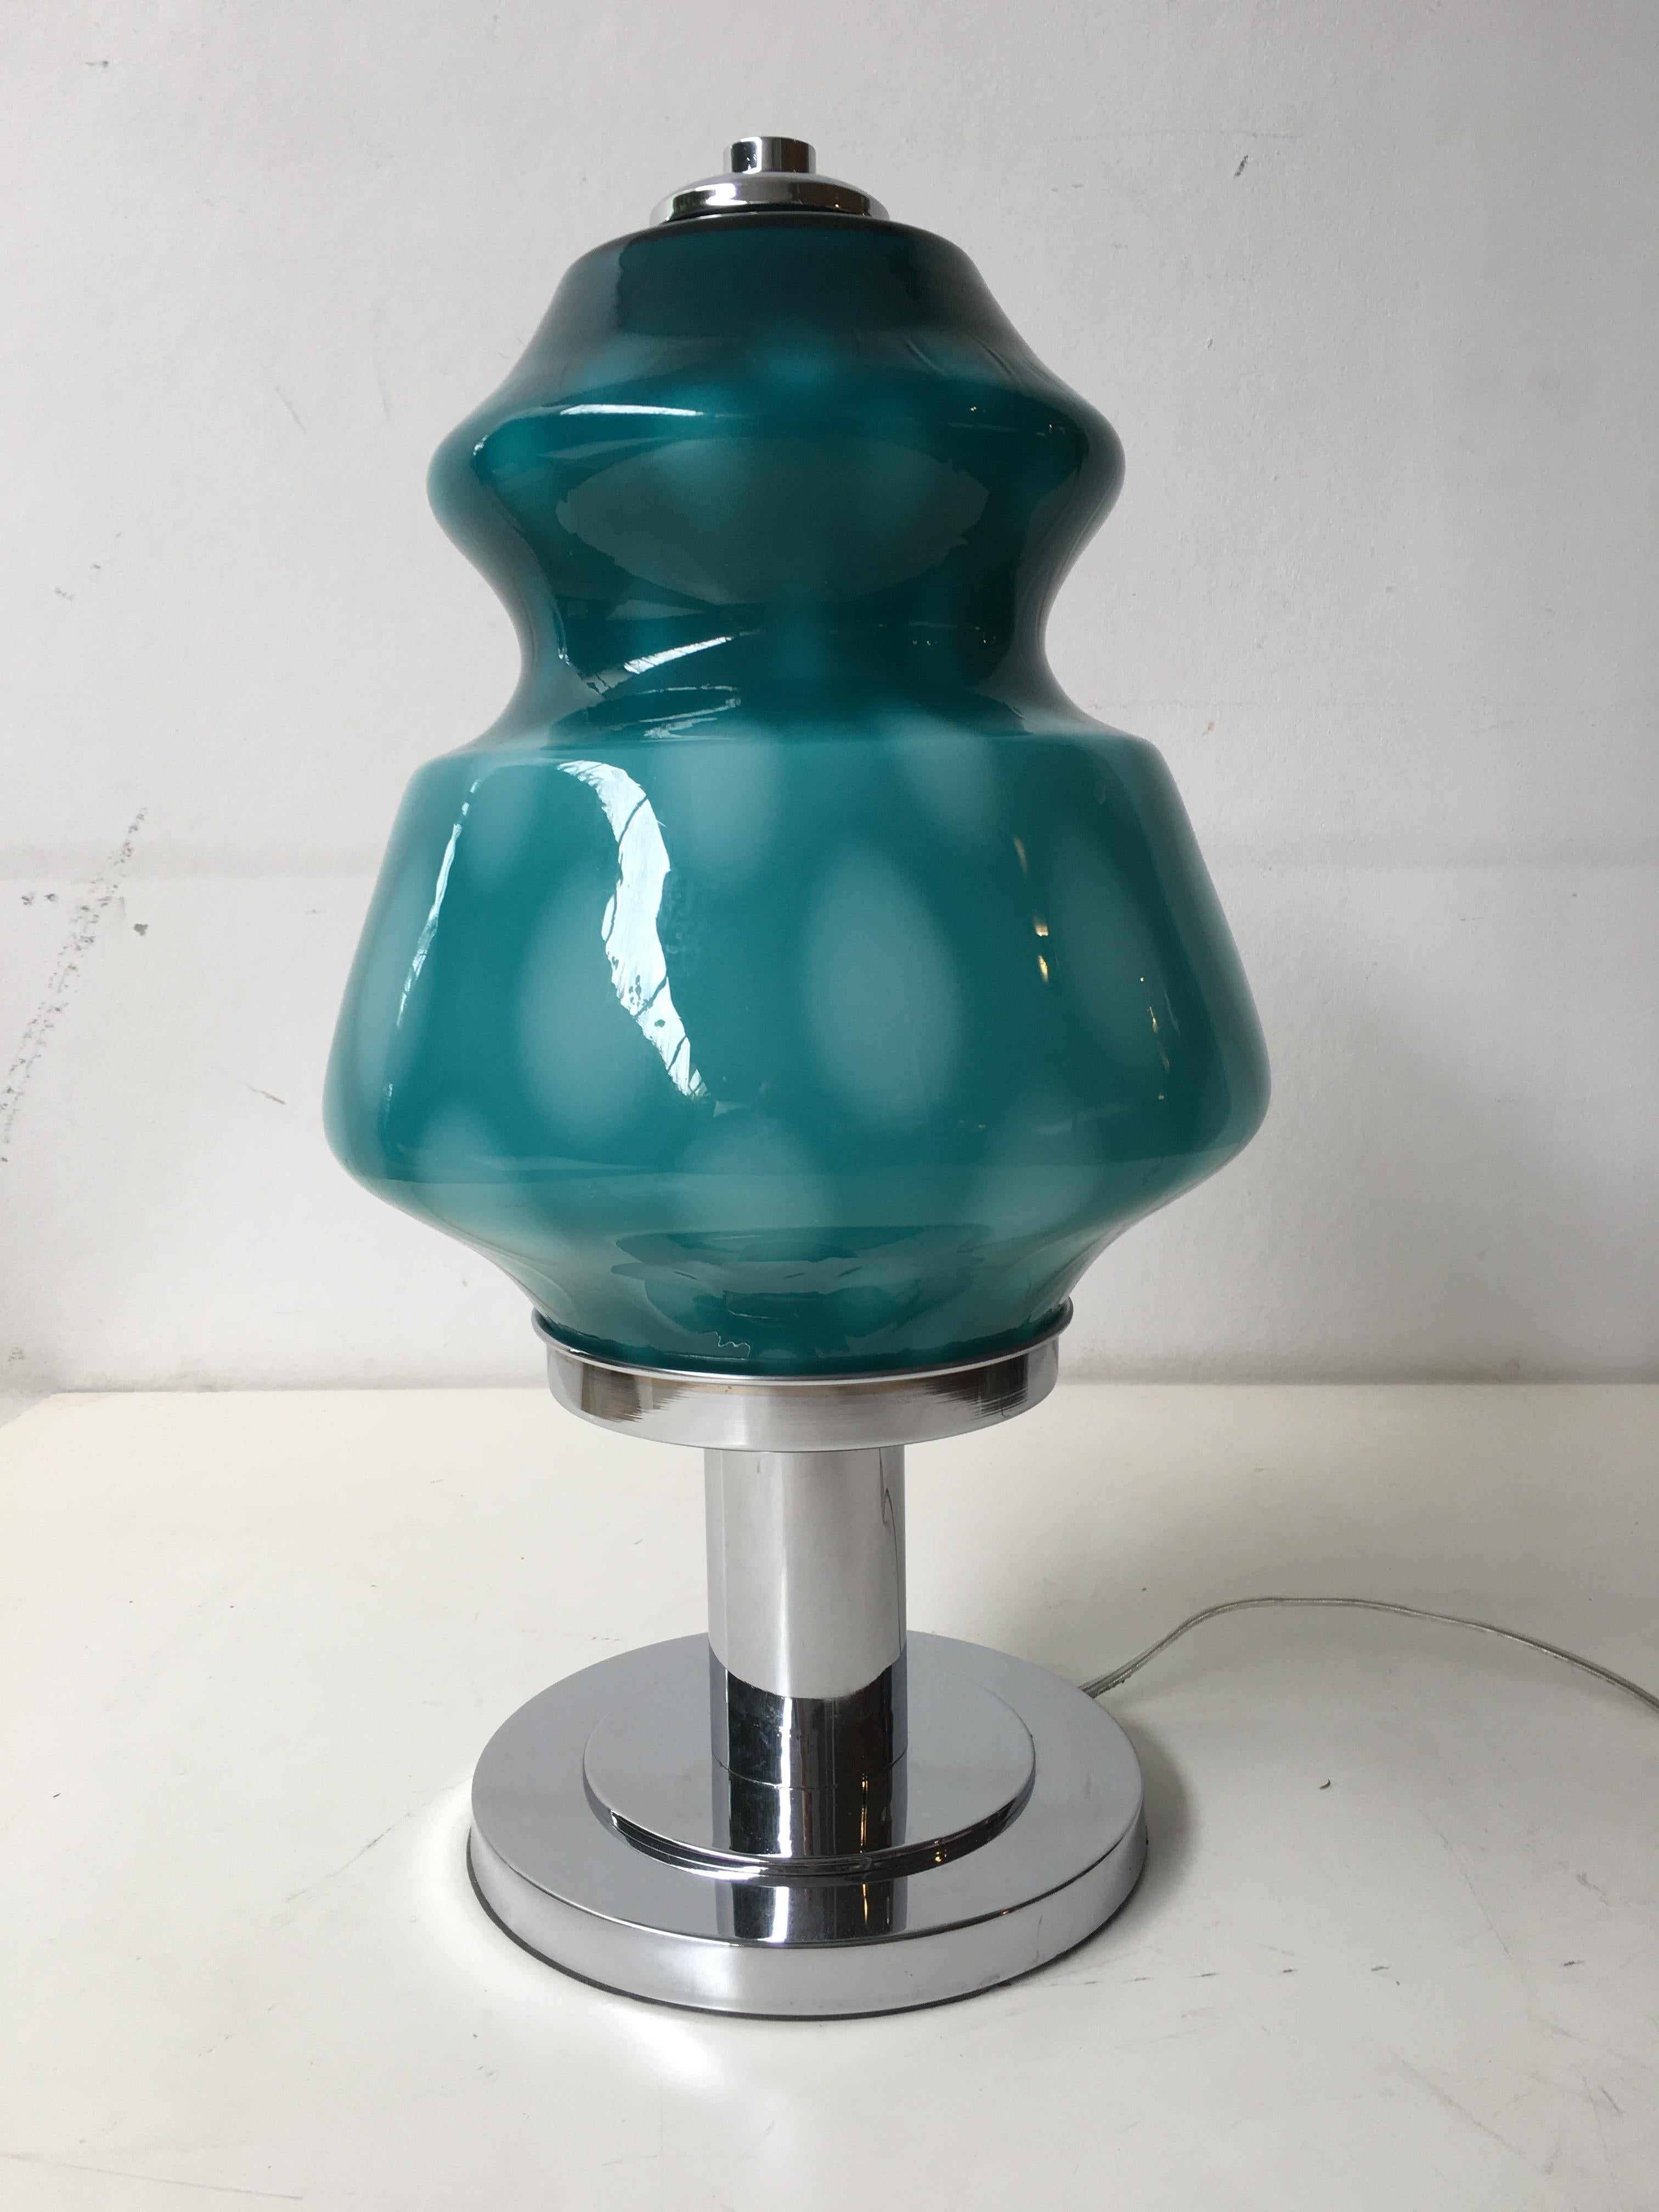 Rare green and white opaline glass table lamp, 1970s
Made of opaline glass
Re-polished
Fully functional
Very good condition
In the style of Sergio Mazza.